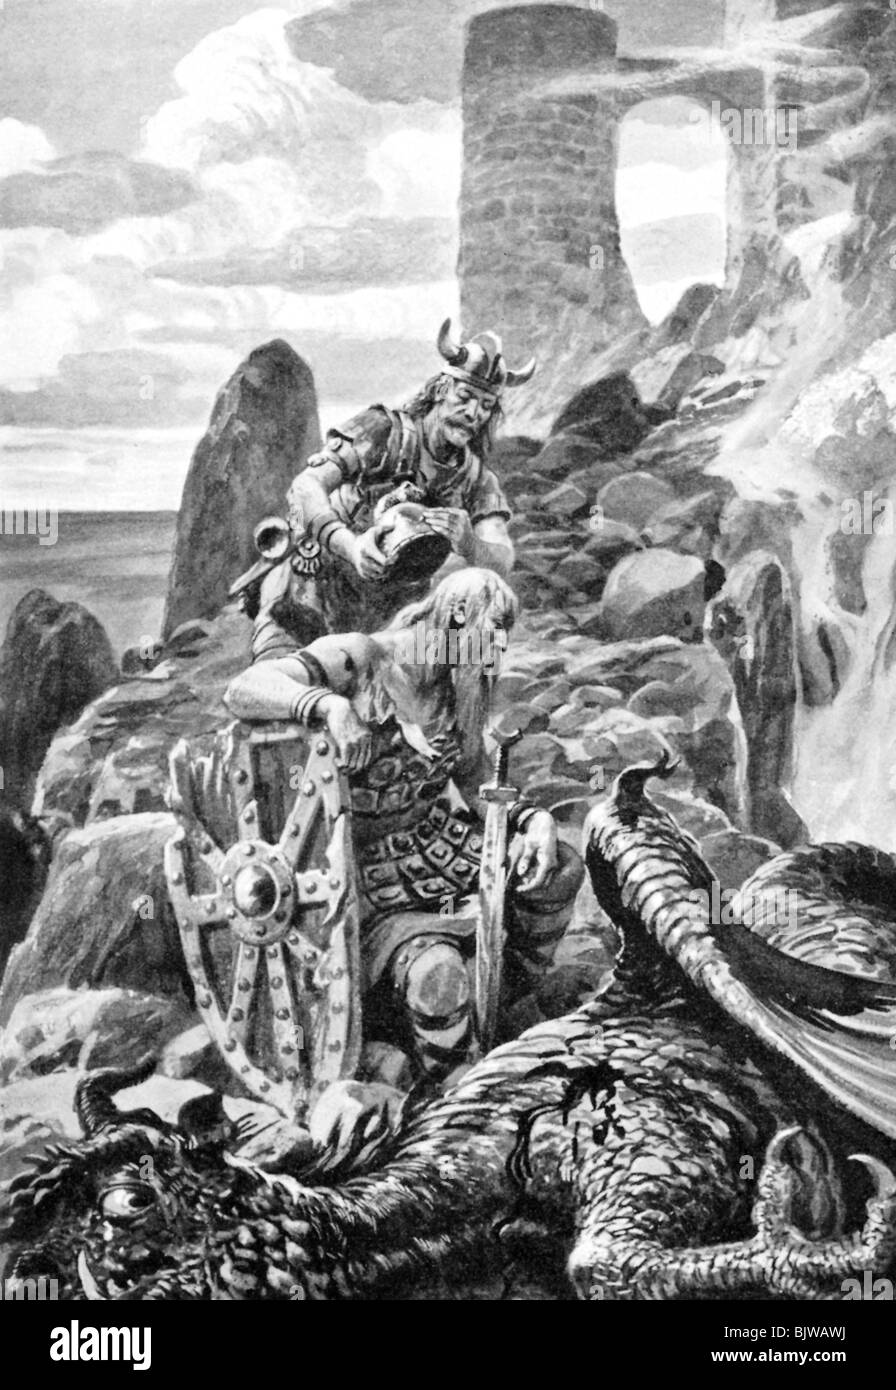 literature, nordic saga, 'Beowulf', Old English heroic epic from 8th century, illustration by Hans W. Schmidt, 1904, Beowulf and Wiglef after the fight with the dragon, Stock Photo